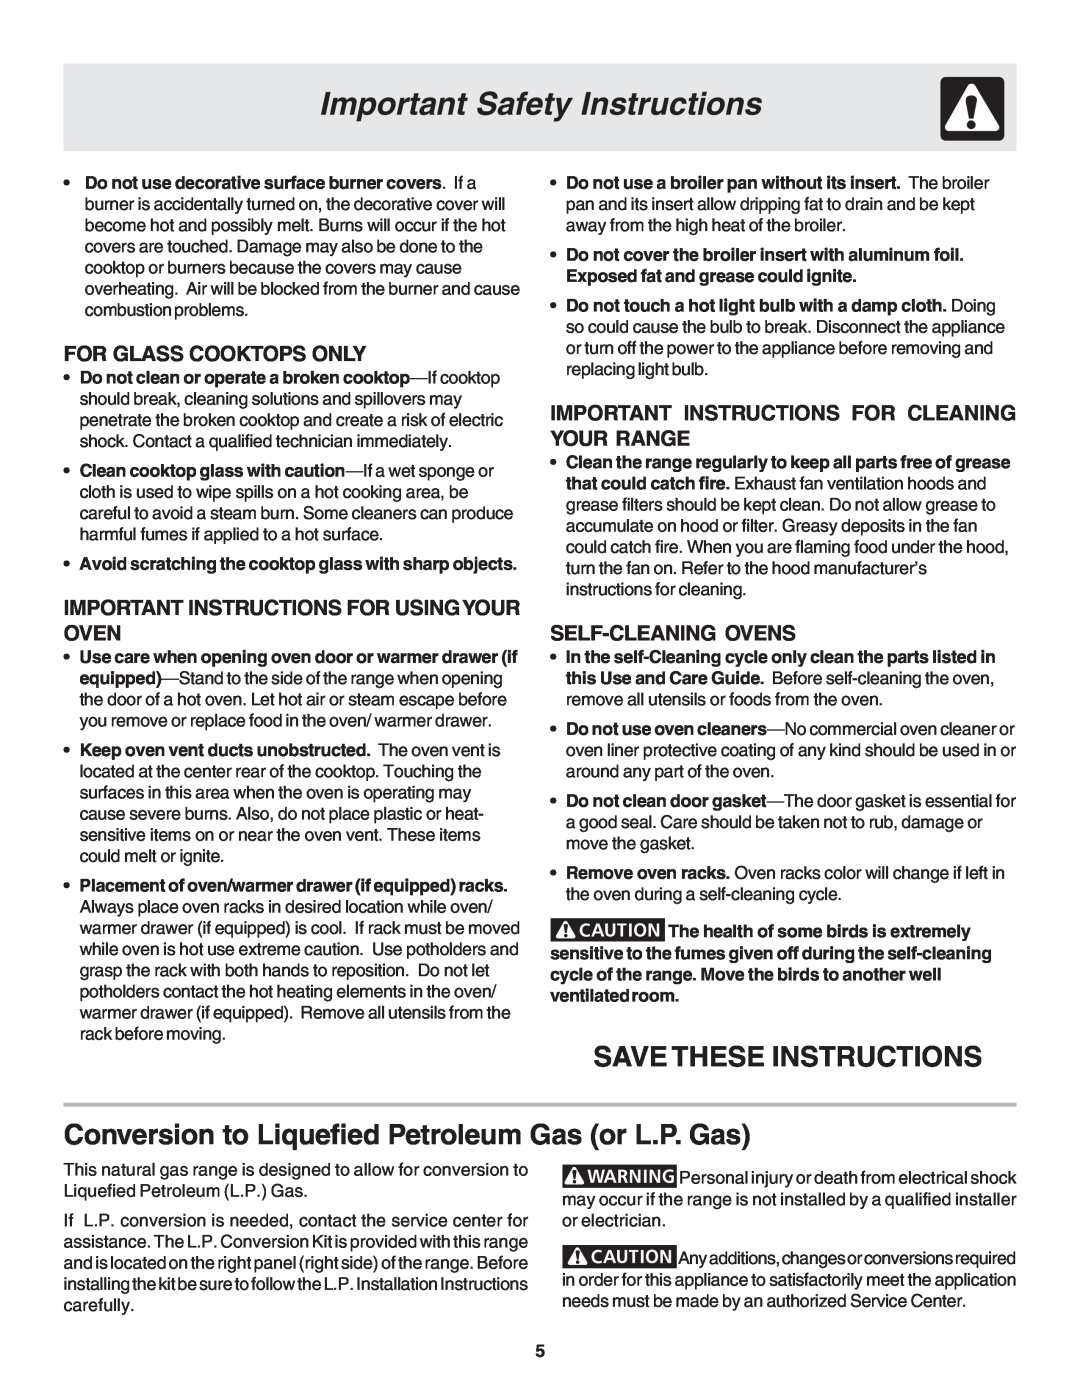 Frigidaire 318203875 Save These Instructions, Conversion to Liquefied Petroleum Gas or L.P. Gas, For Glass Cooktops Only 